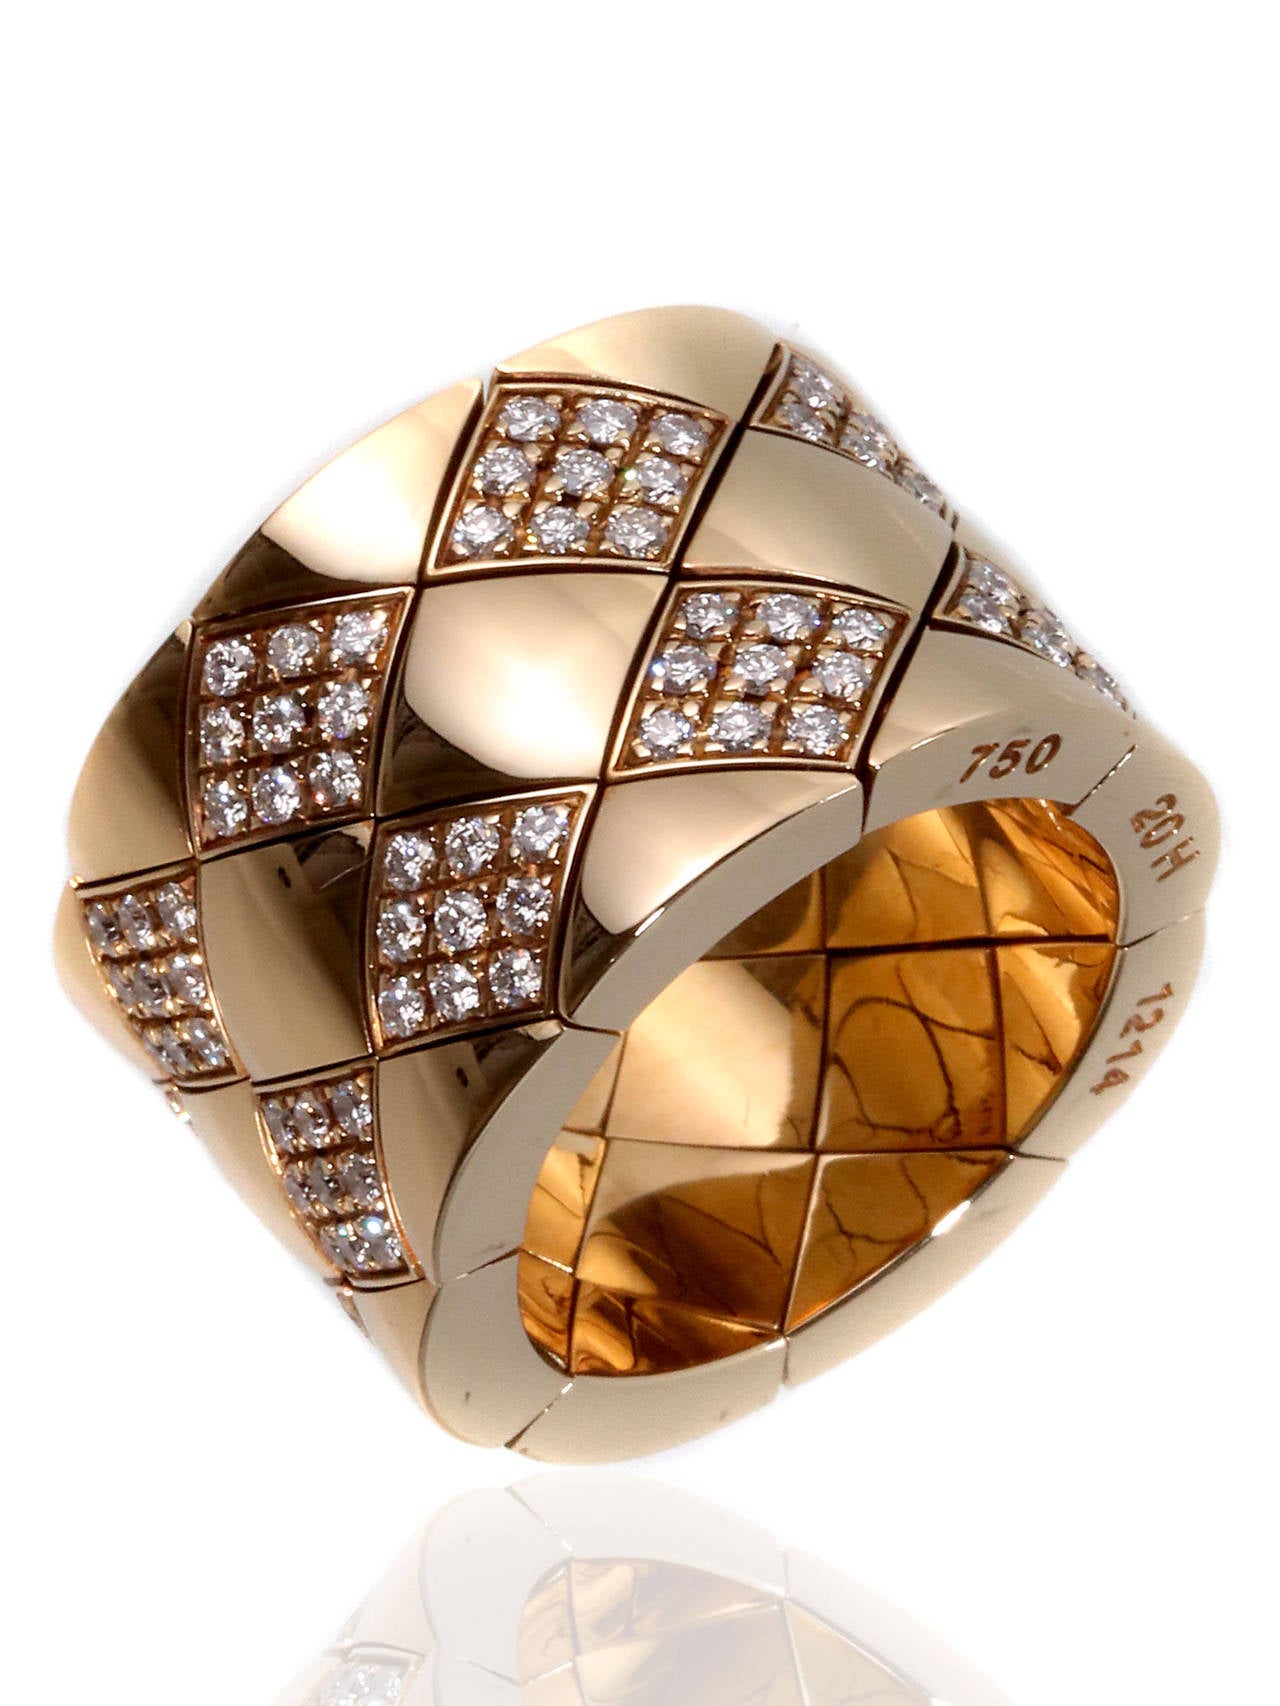 Fabulously studded with Vs round brilliant cut diamonds this chic Chanel Matelasse diamond ring is crafted in 18k yellow gold, measuring 13mm wide, and is sz 5 US.